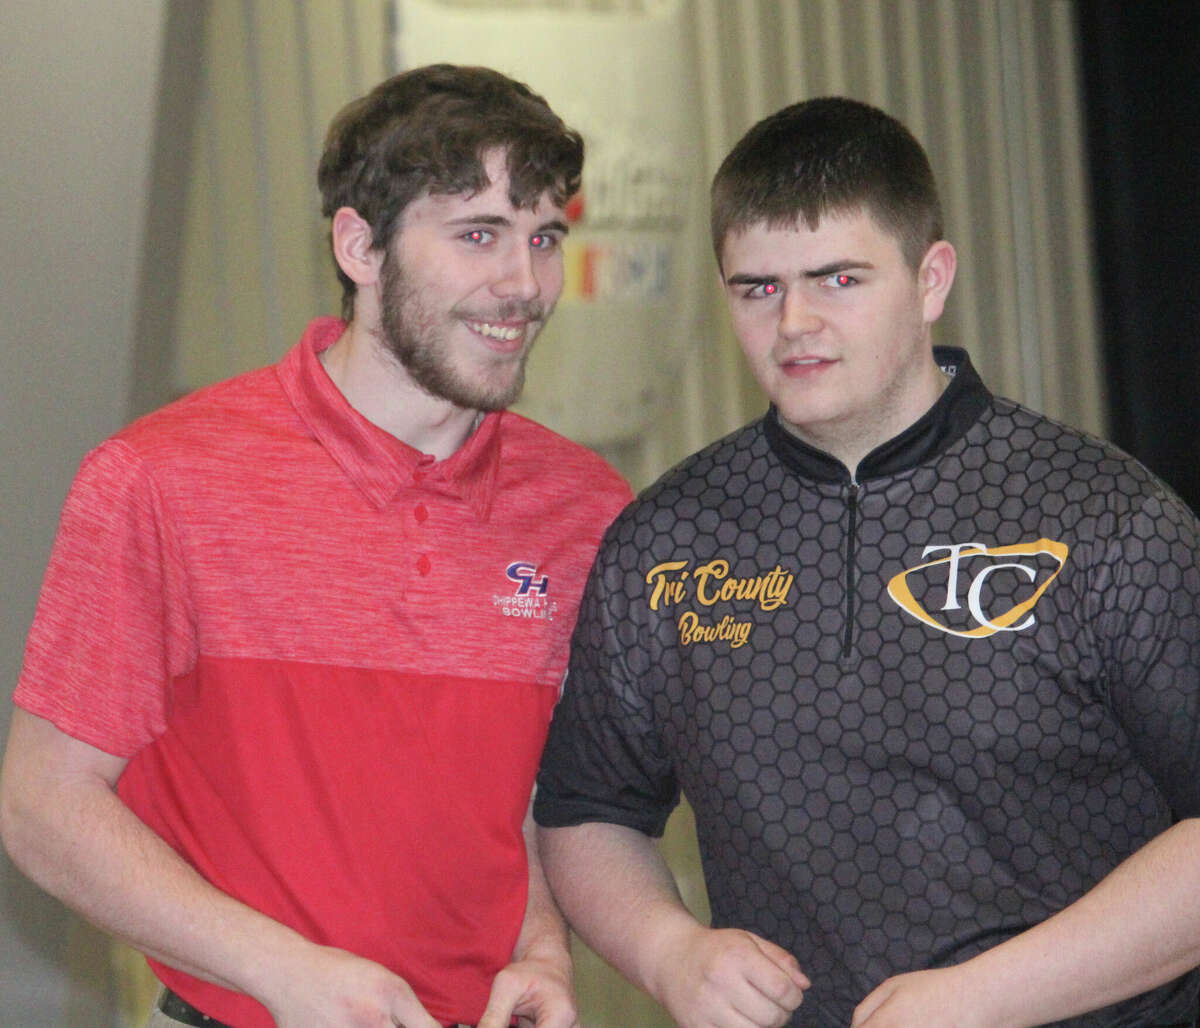 Doniven Todd (left) of Chippewa Hills, shares a smile with a Tri County bowler after being honored at the Big Rapids Bowling Center on Monday for having the CSAA Gold's highest average of the season.